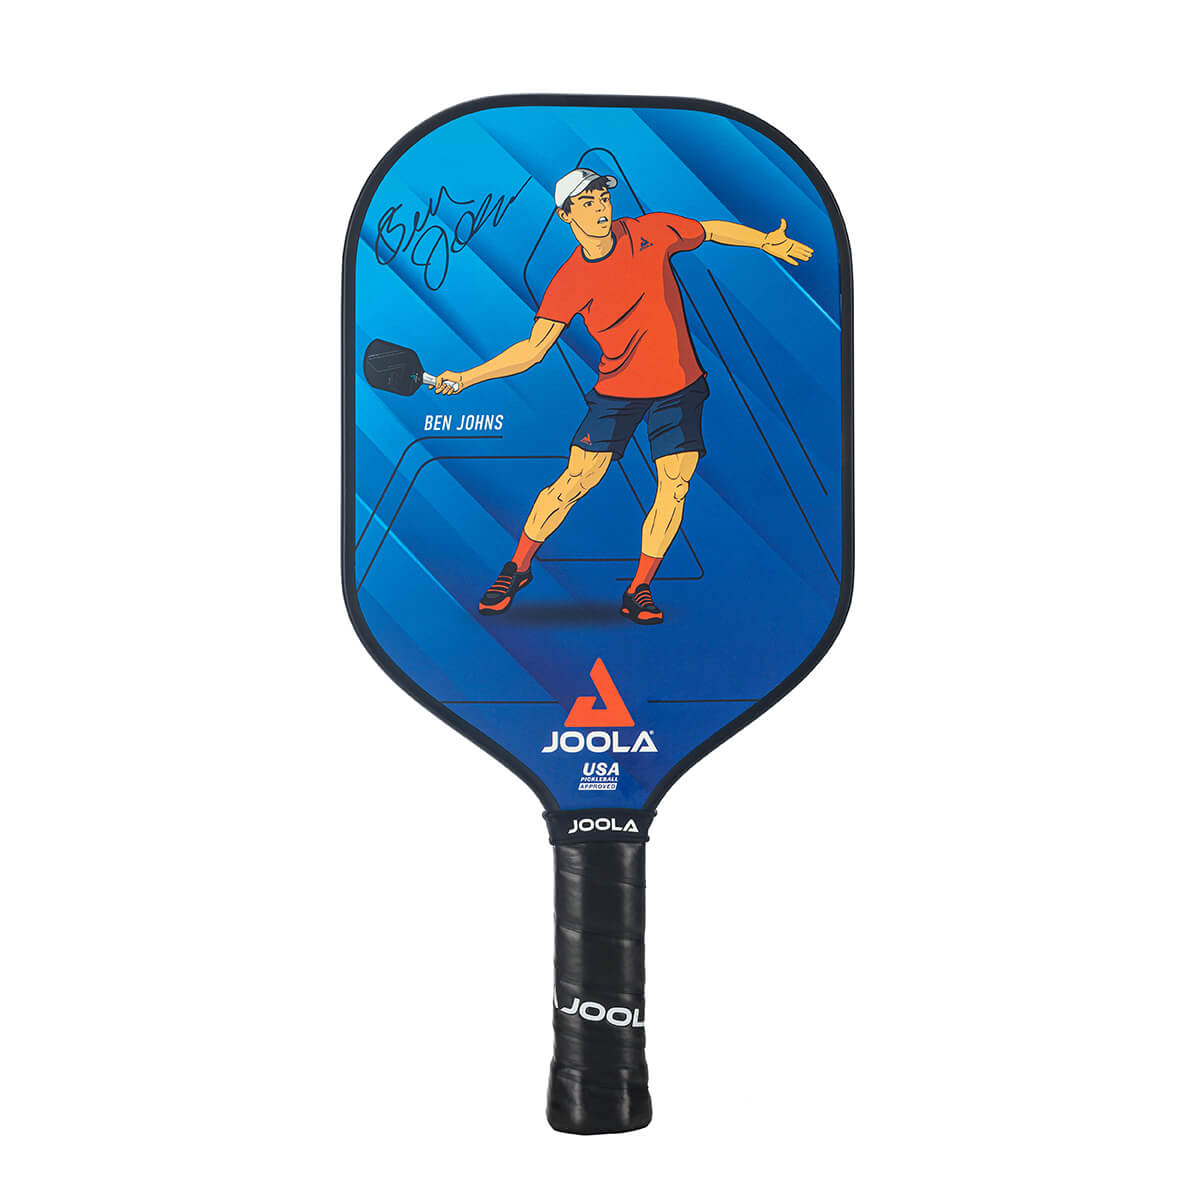 A JOOLA Junior Pickleball Paddle with an image of a man playing ping pong.